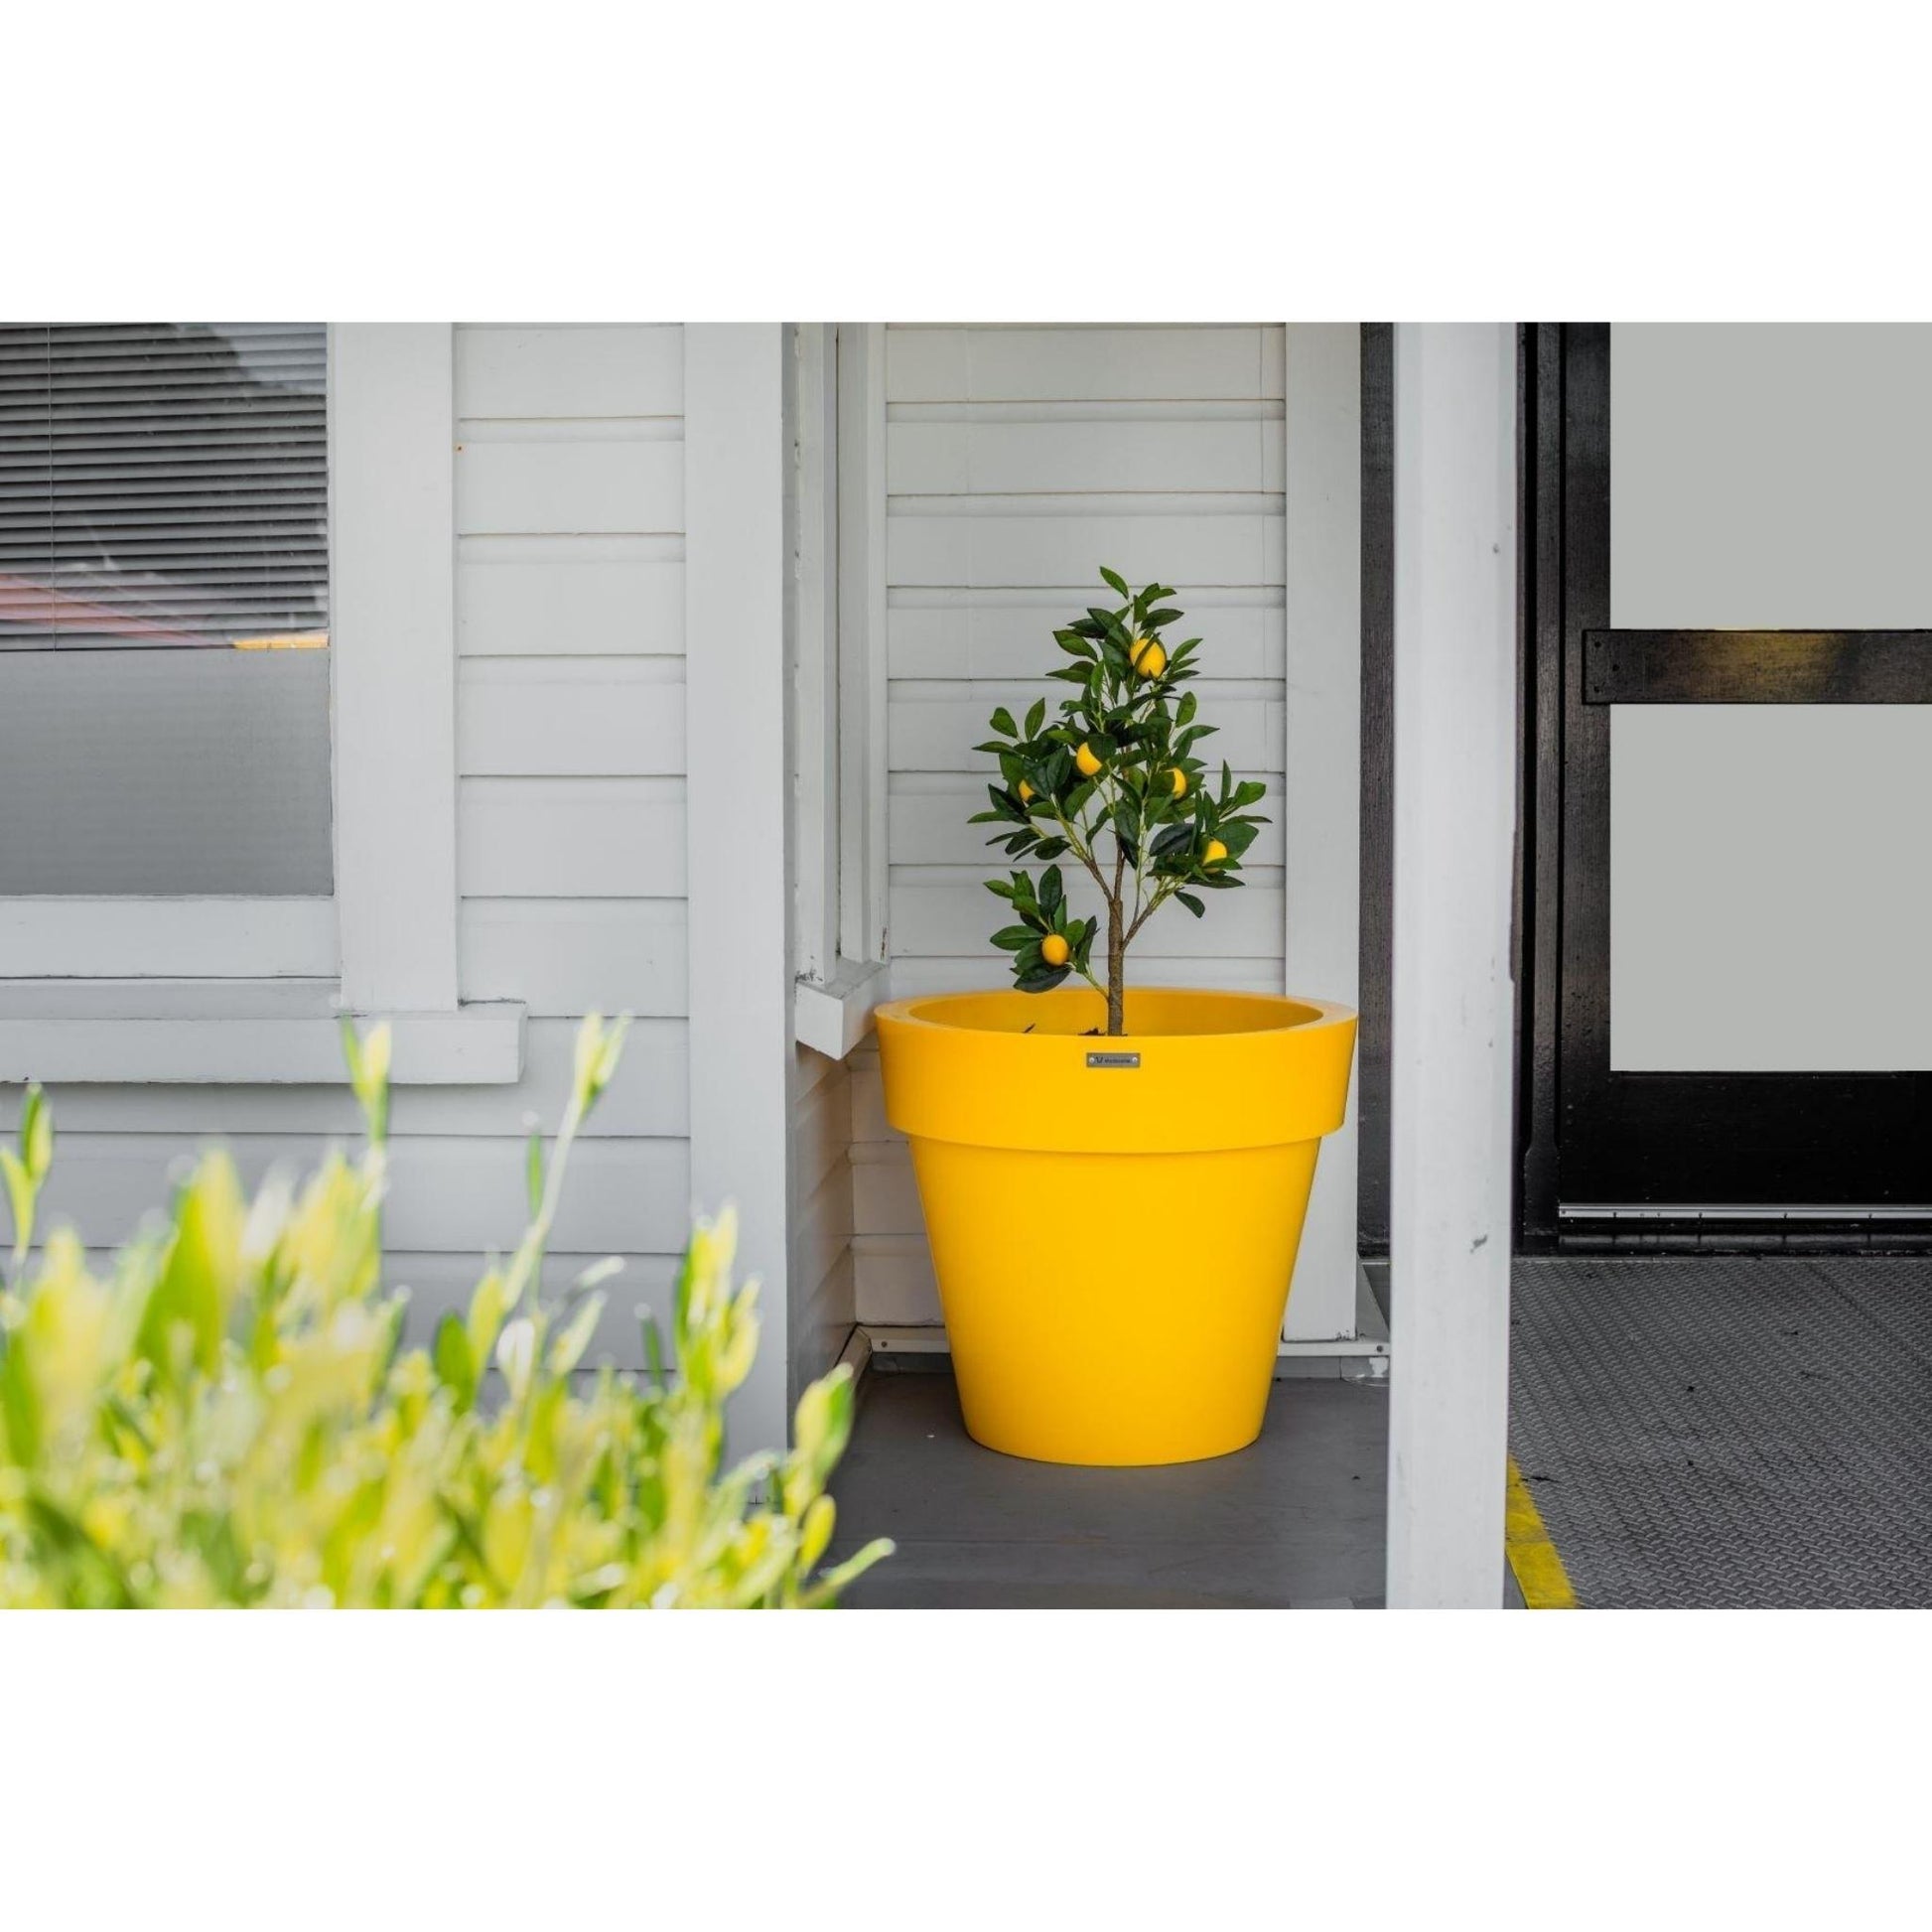 A large yellow planter pot in front of a house wall. The pot is planted with a citrus tree and some flowers. 